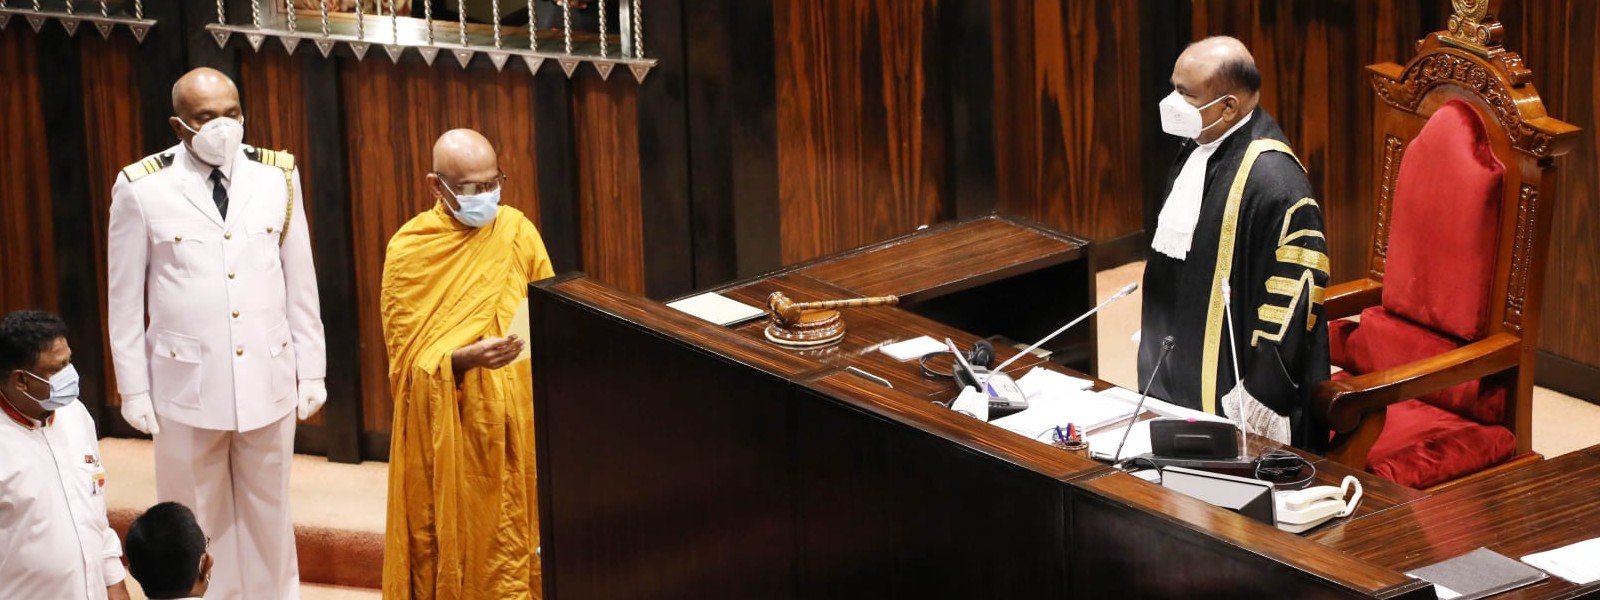 VEN. RATHANA THERO TAKES OATHS IN PARLIAMENT